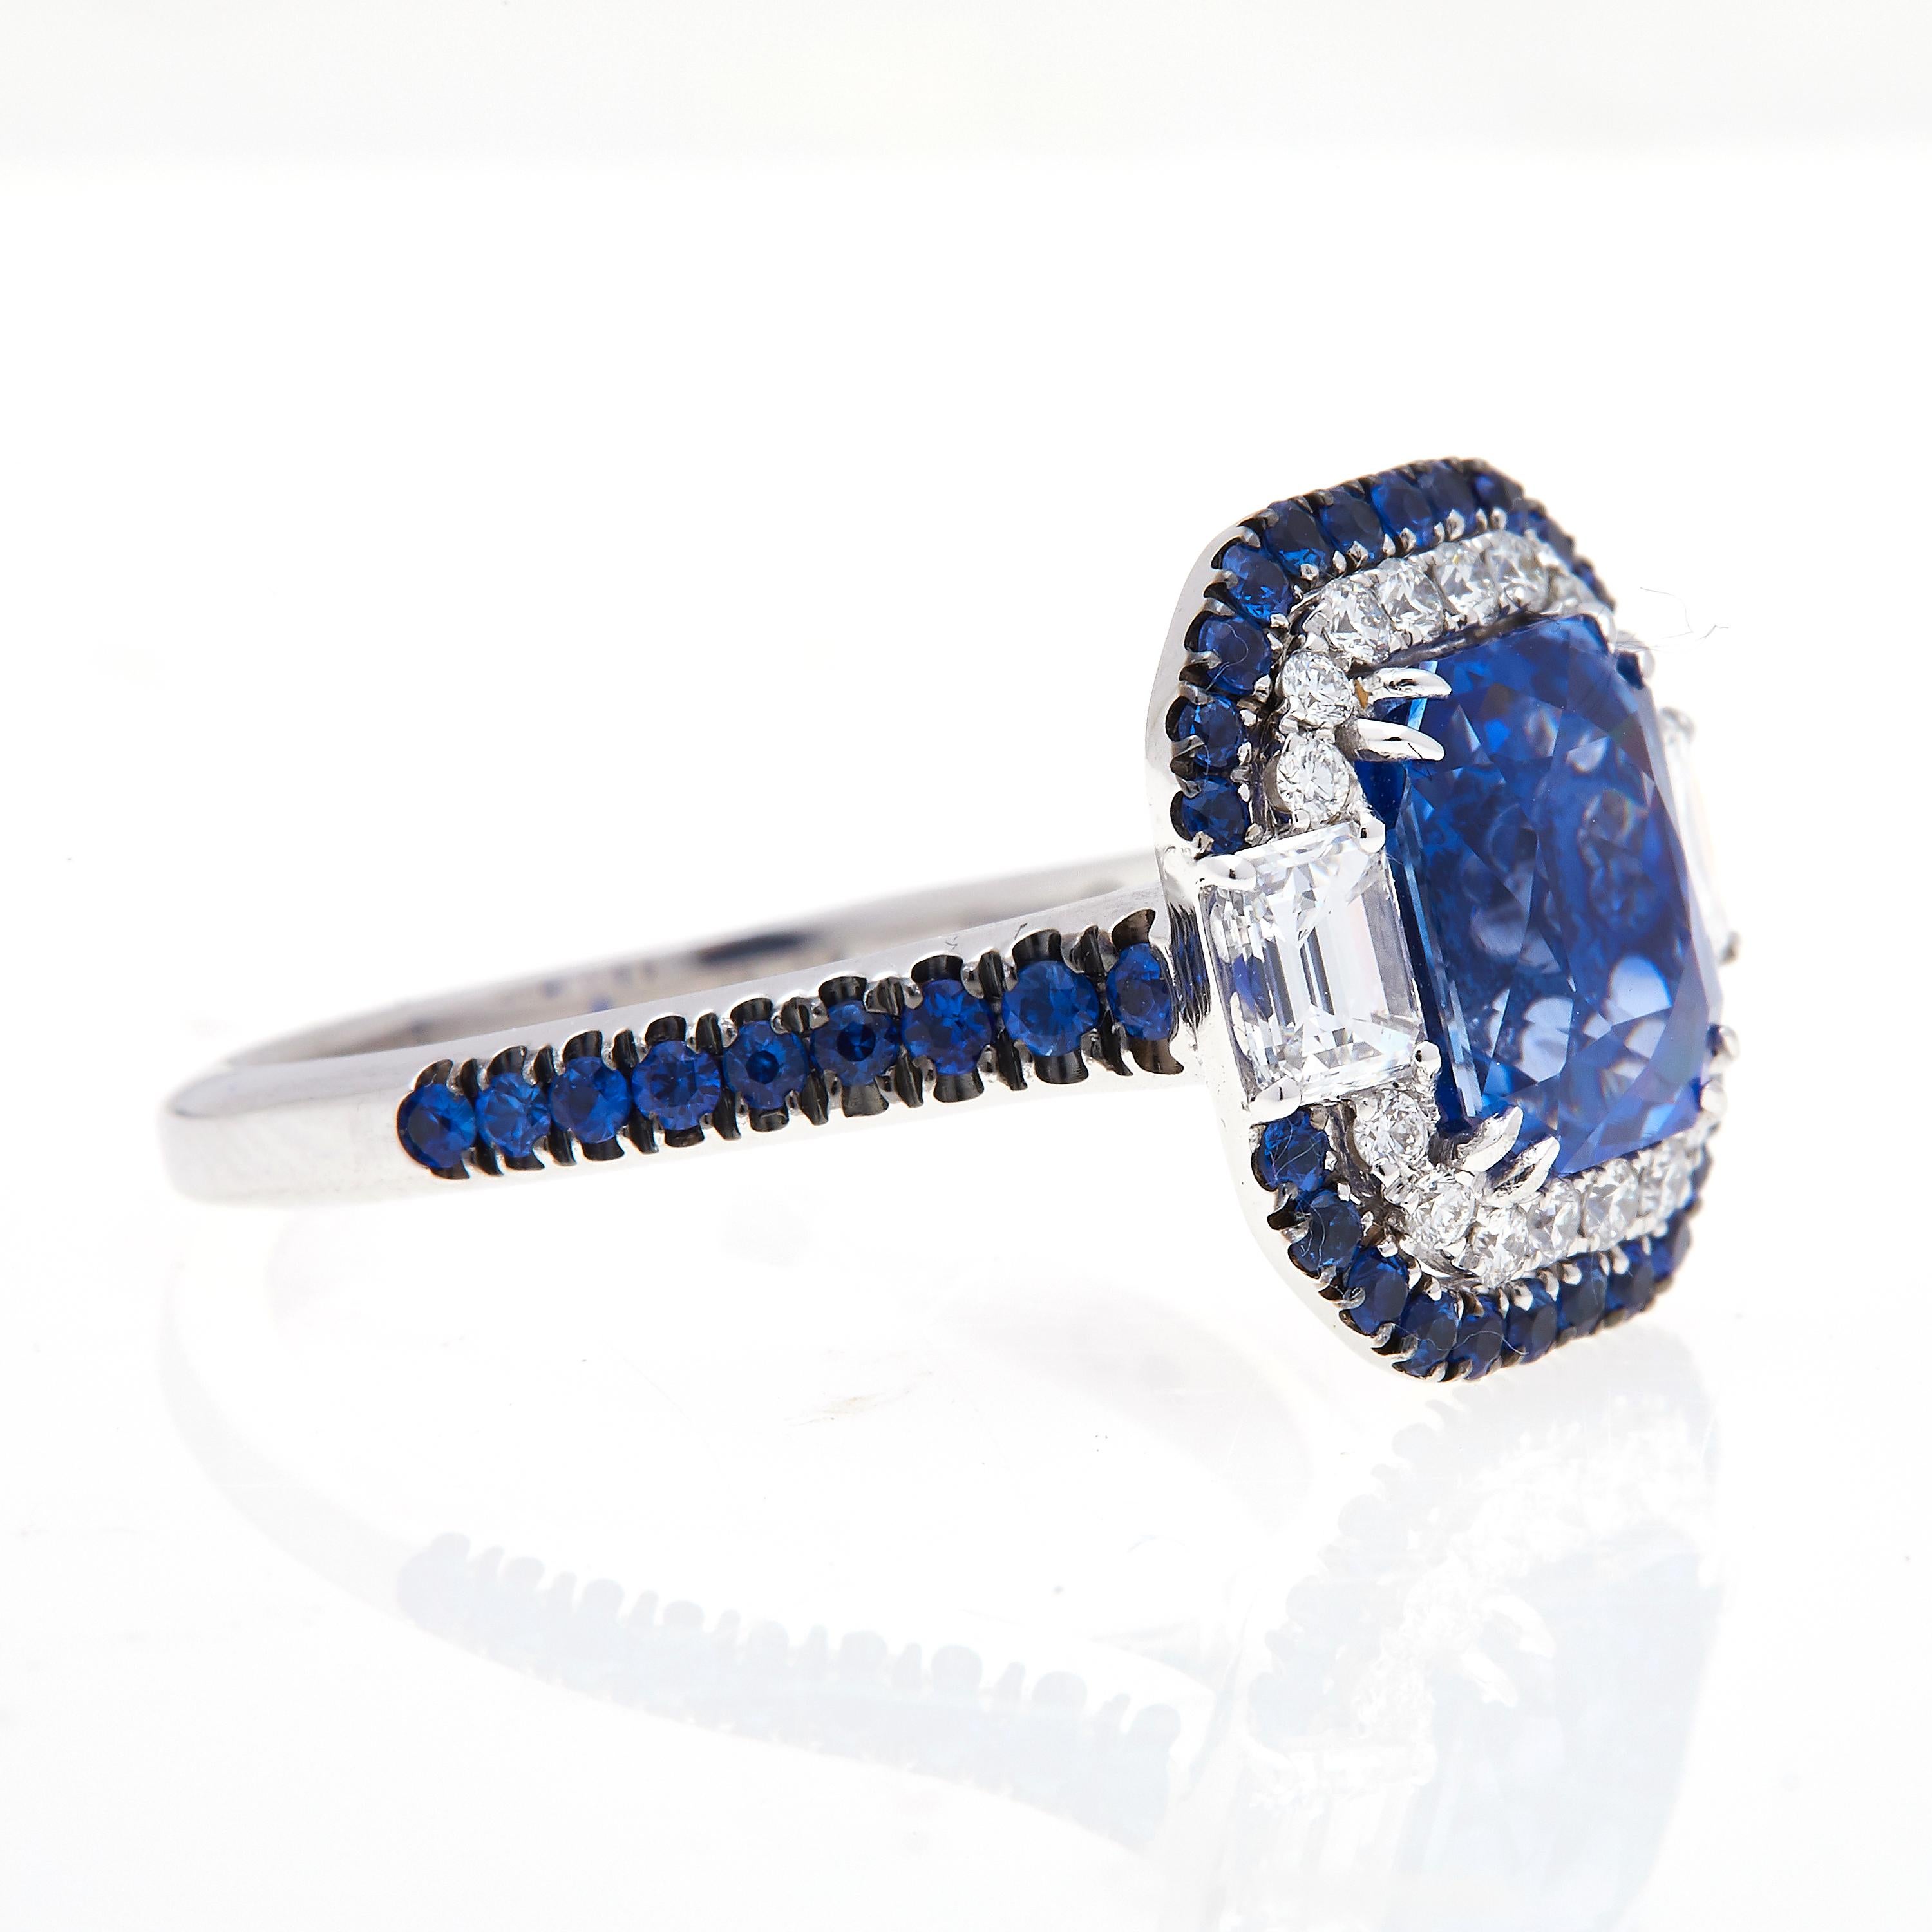 Cushion Cut Art Deco Inspired 4.11ct Certified Unheated Blue Cushion Sapphire Ring For Sale